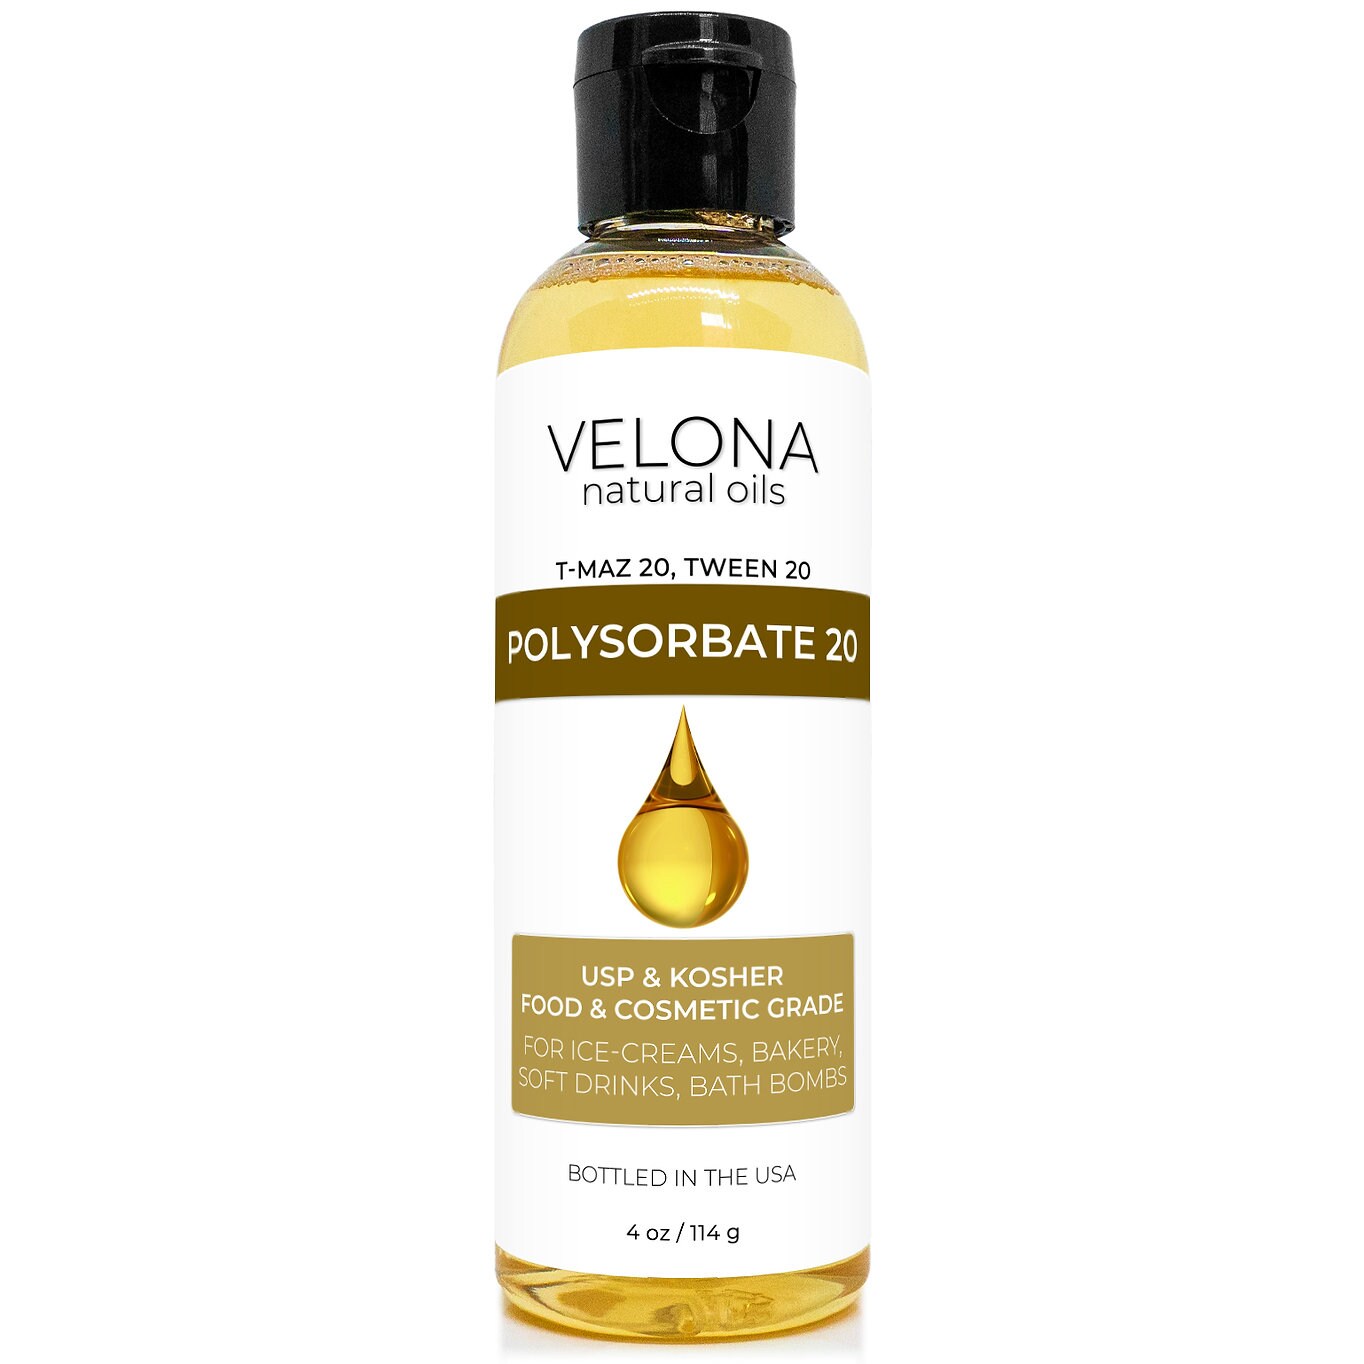 Polysorbate 20 by Velona - 4 oz, Solubilizer, Food & Cosmetic Grade, All  Natural for Cooking, Skin Care and Bath Bombs, Use Today - Enjoy Results